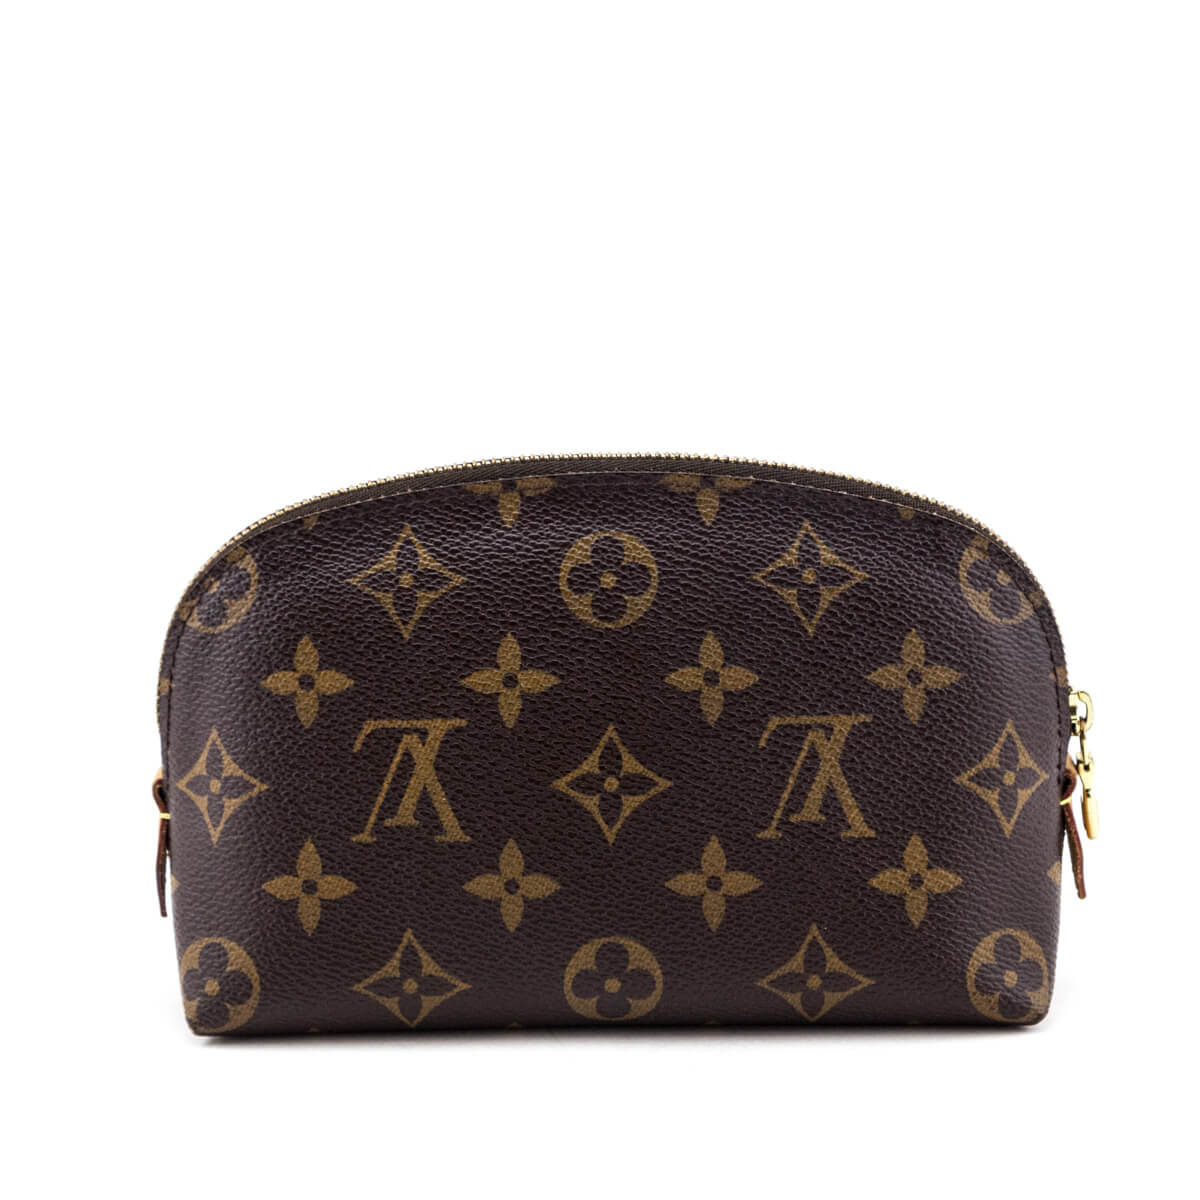 Louis Vuitton Monogram Cosmetic Pouch - Love that Bag etc - Preowned Authentic Designer Handbags & Preloved Fashions